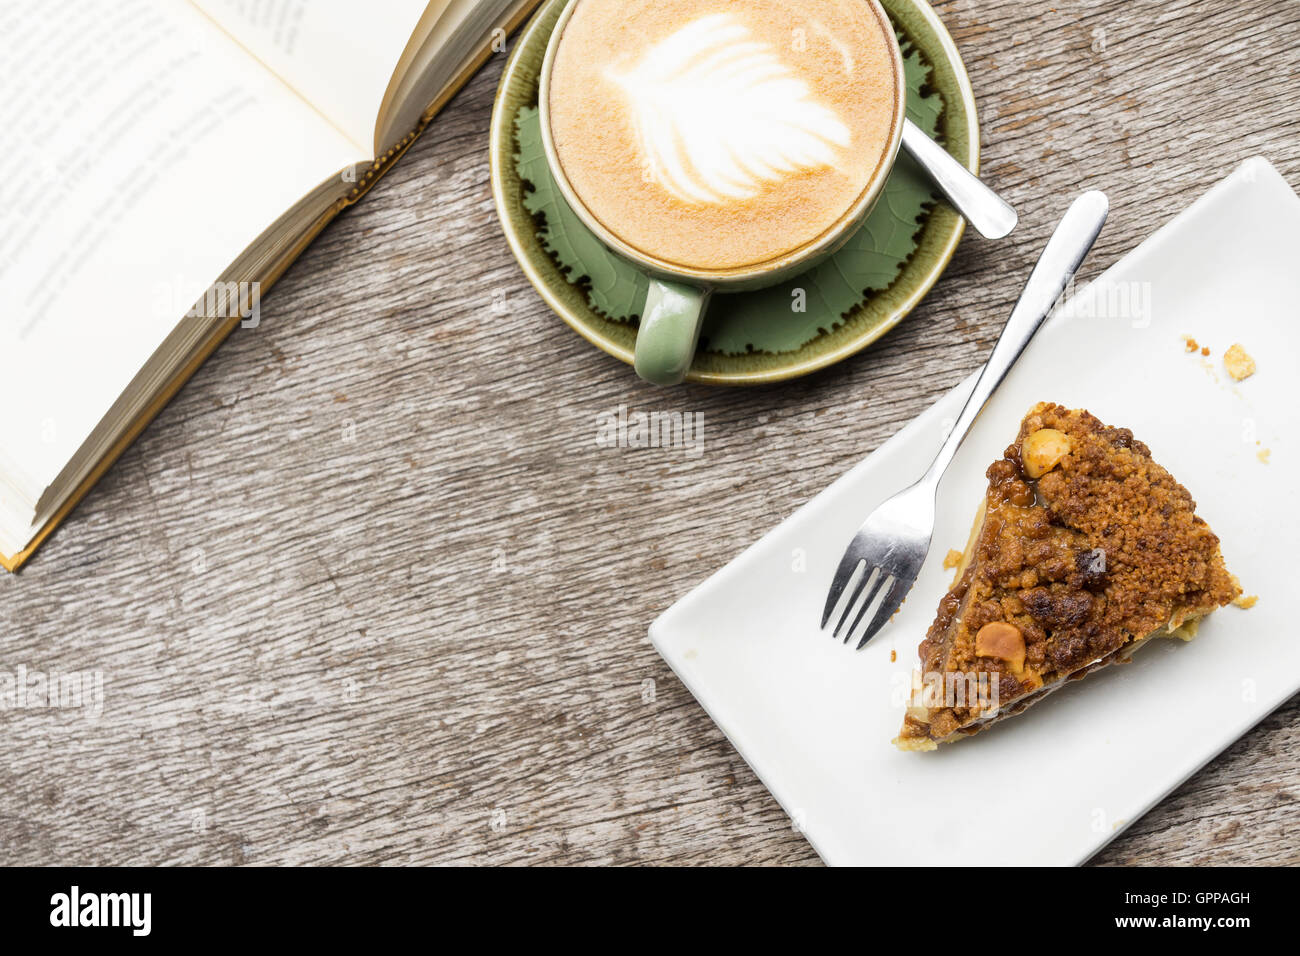 Leisure reading book with apple crumble pie and big coffee latte cup Stock Photo